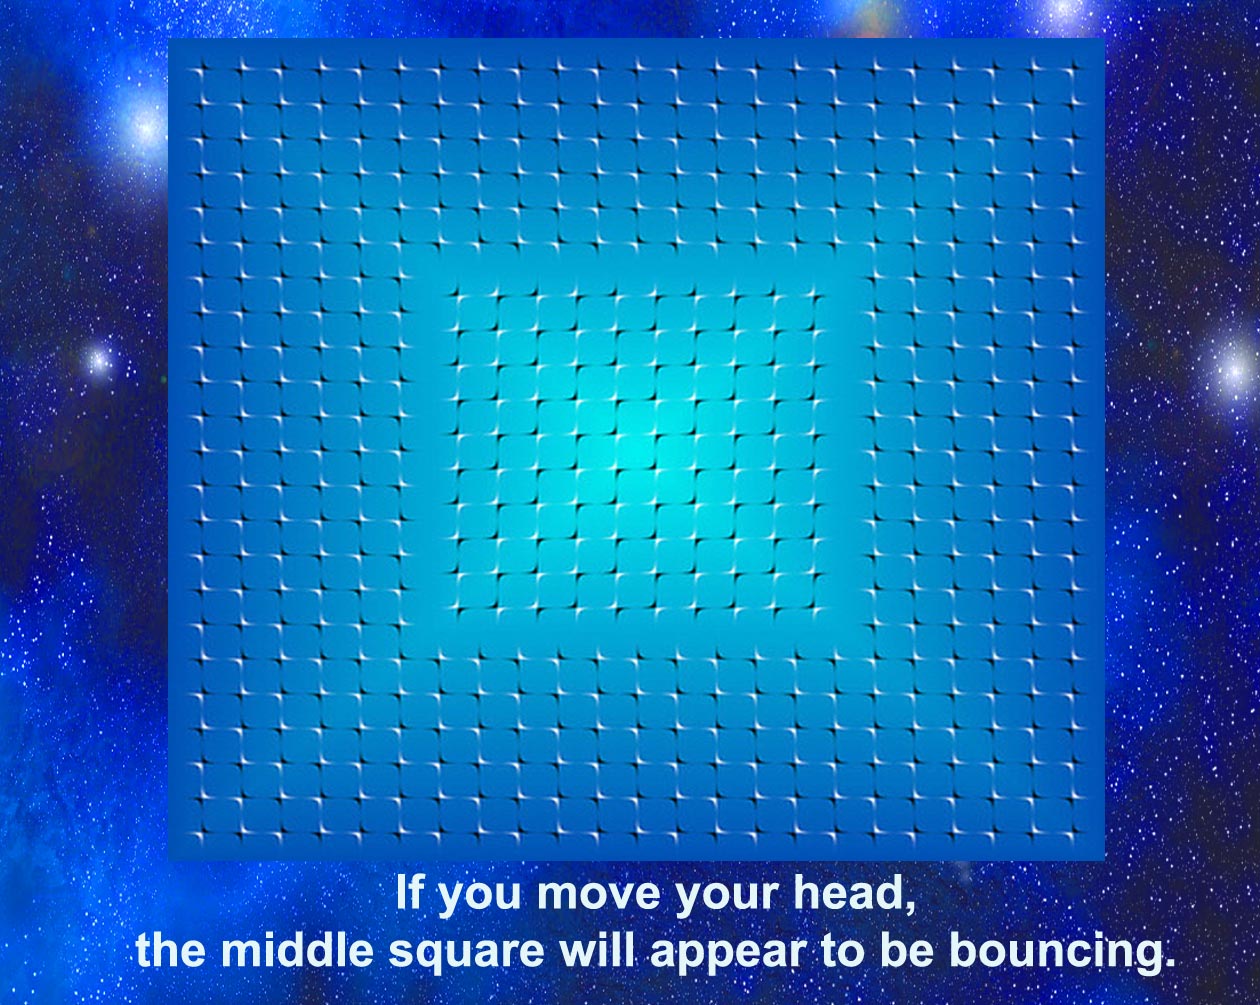 Move your head and the middle square will move